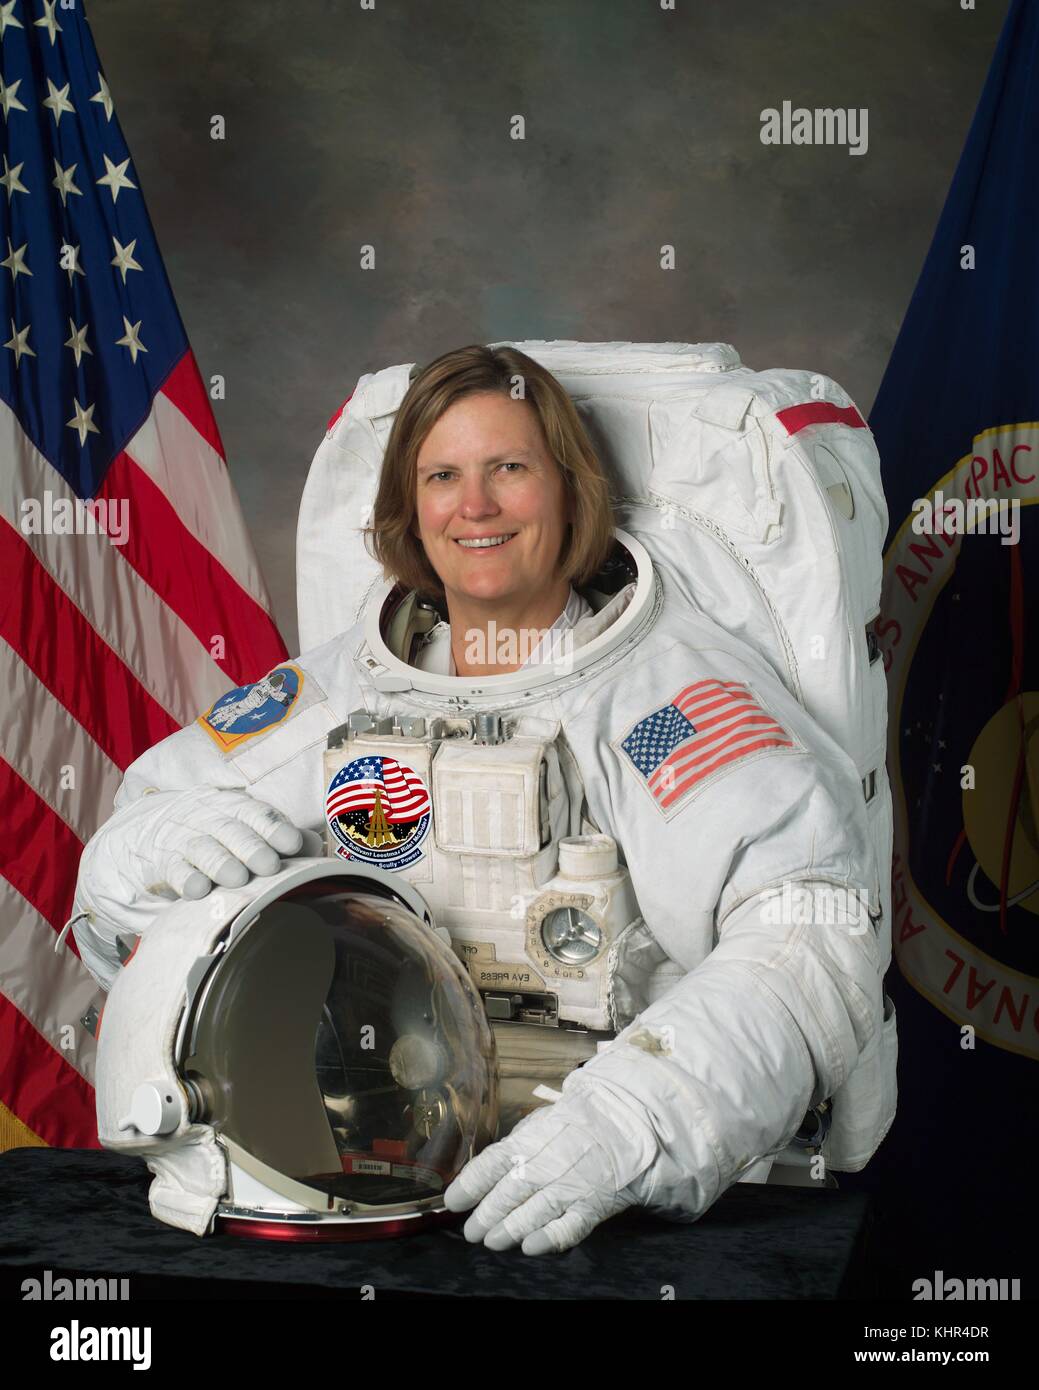 Official portrait of NASA Space Shuttle STS-31, STS-41 and STS-45 mission astronaut Kathryn Sullivan in a spacesuit at the Johnson Space Center July 25, 2003 in Houston, Texas. On her first mission, Sullivan became the first American woman to walk in space.  (photo by NASA Photo via Planetpix) Stock Photo